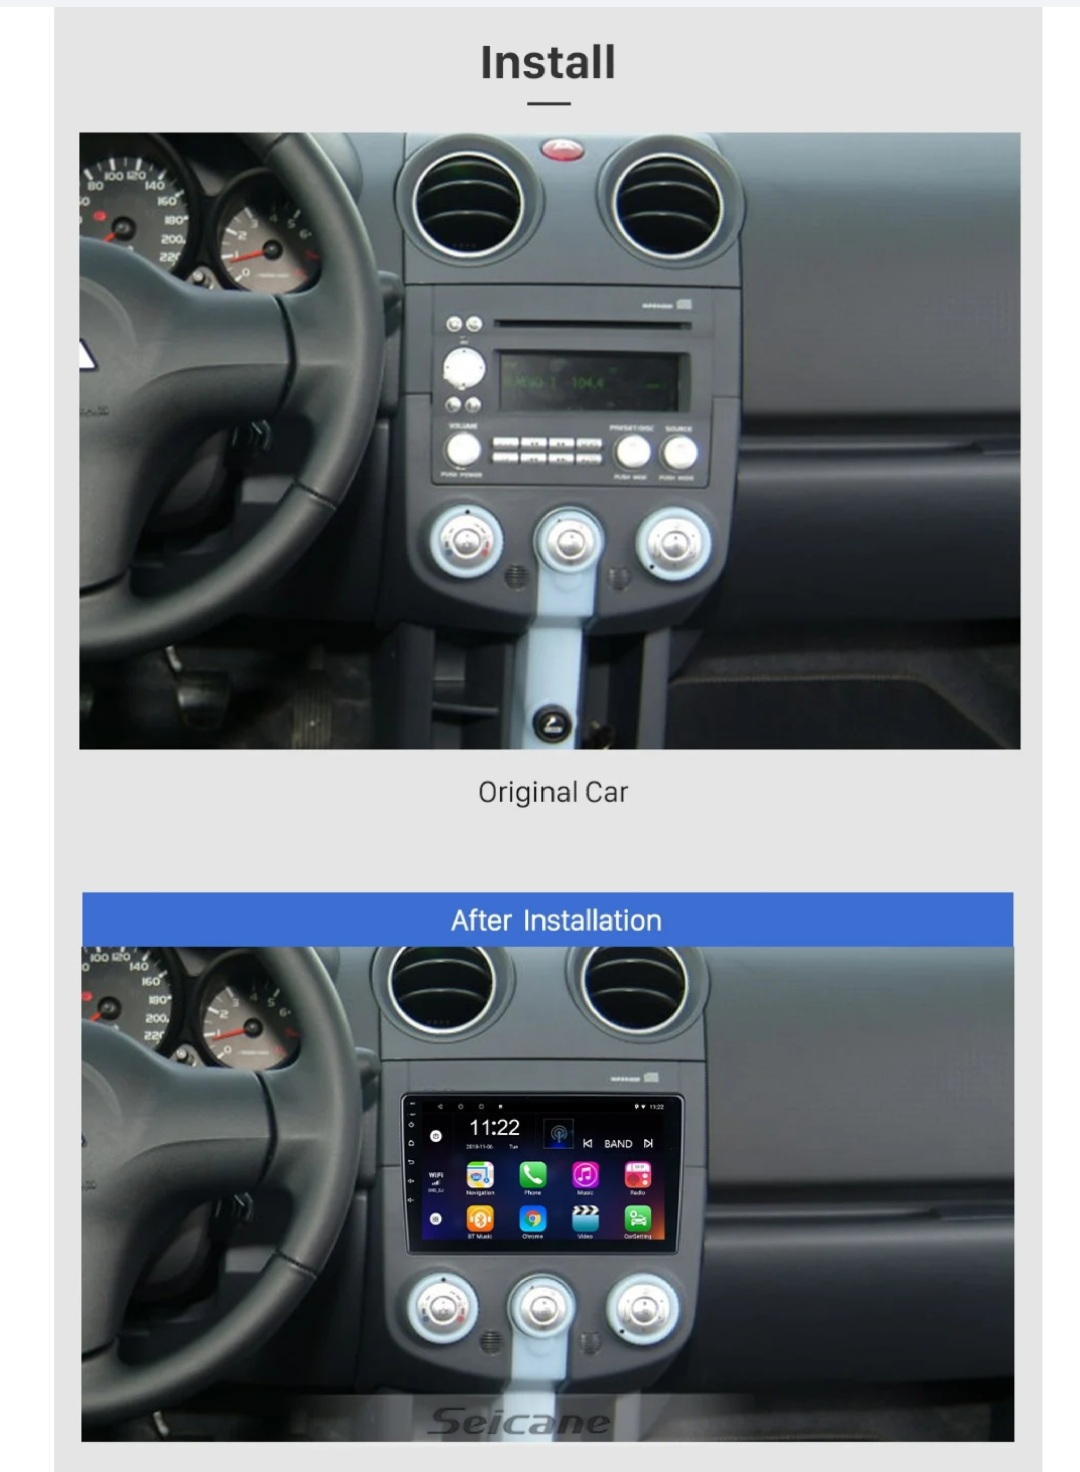 9"android 13  bilstereo  Mitsubishi Colt ( 2007--2012) gps wifi carplay android auto blåtand rds Dsp  Ram: 4GB, ROM: 64GB, 4G LTE